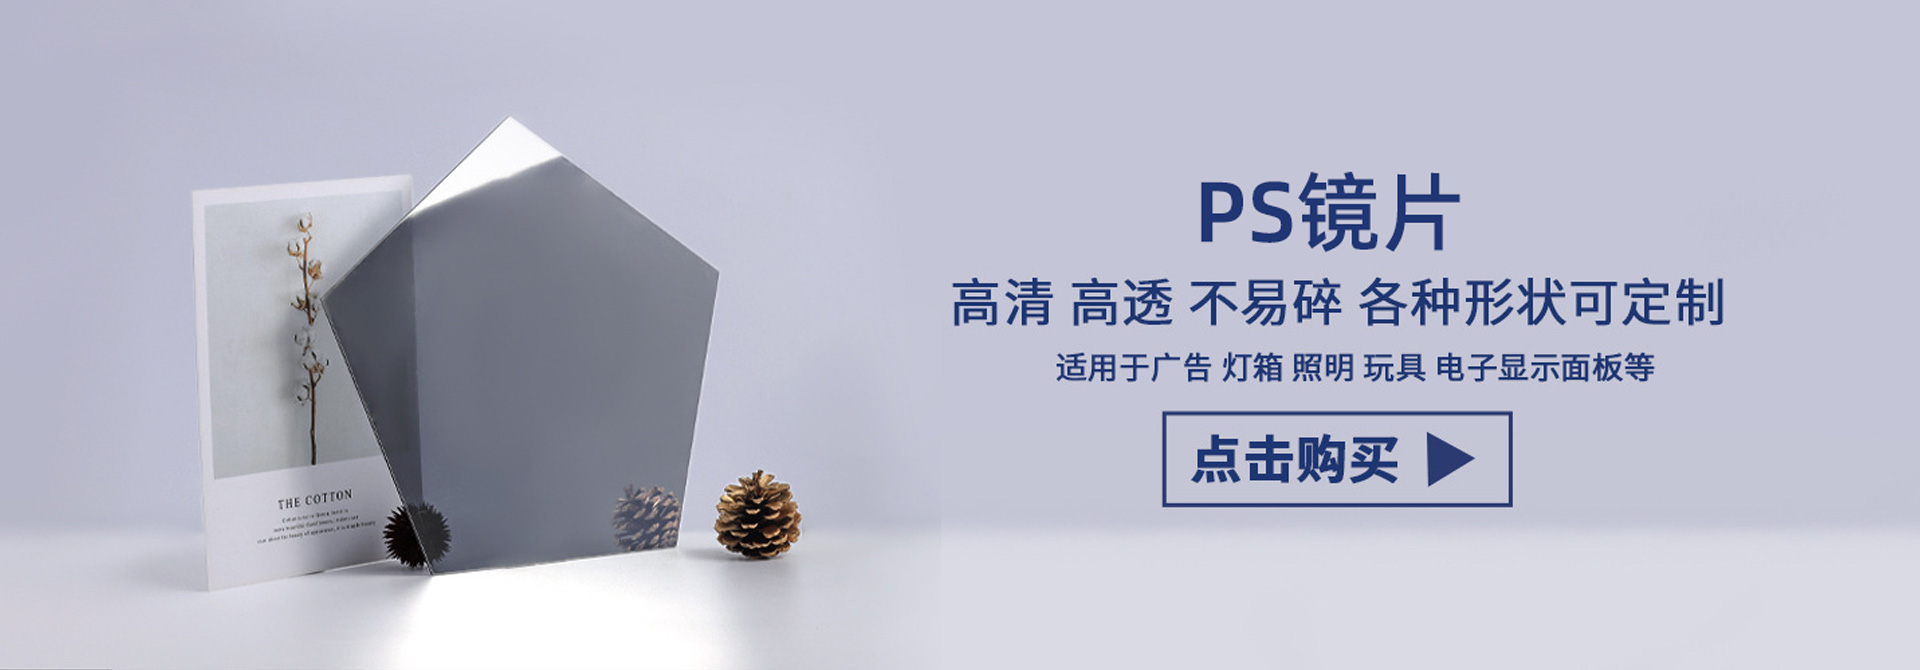 ps板厂家,ps板批发,ps板价格